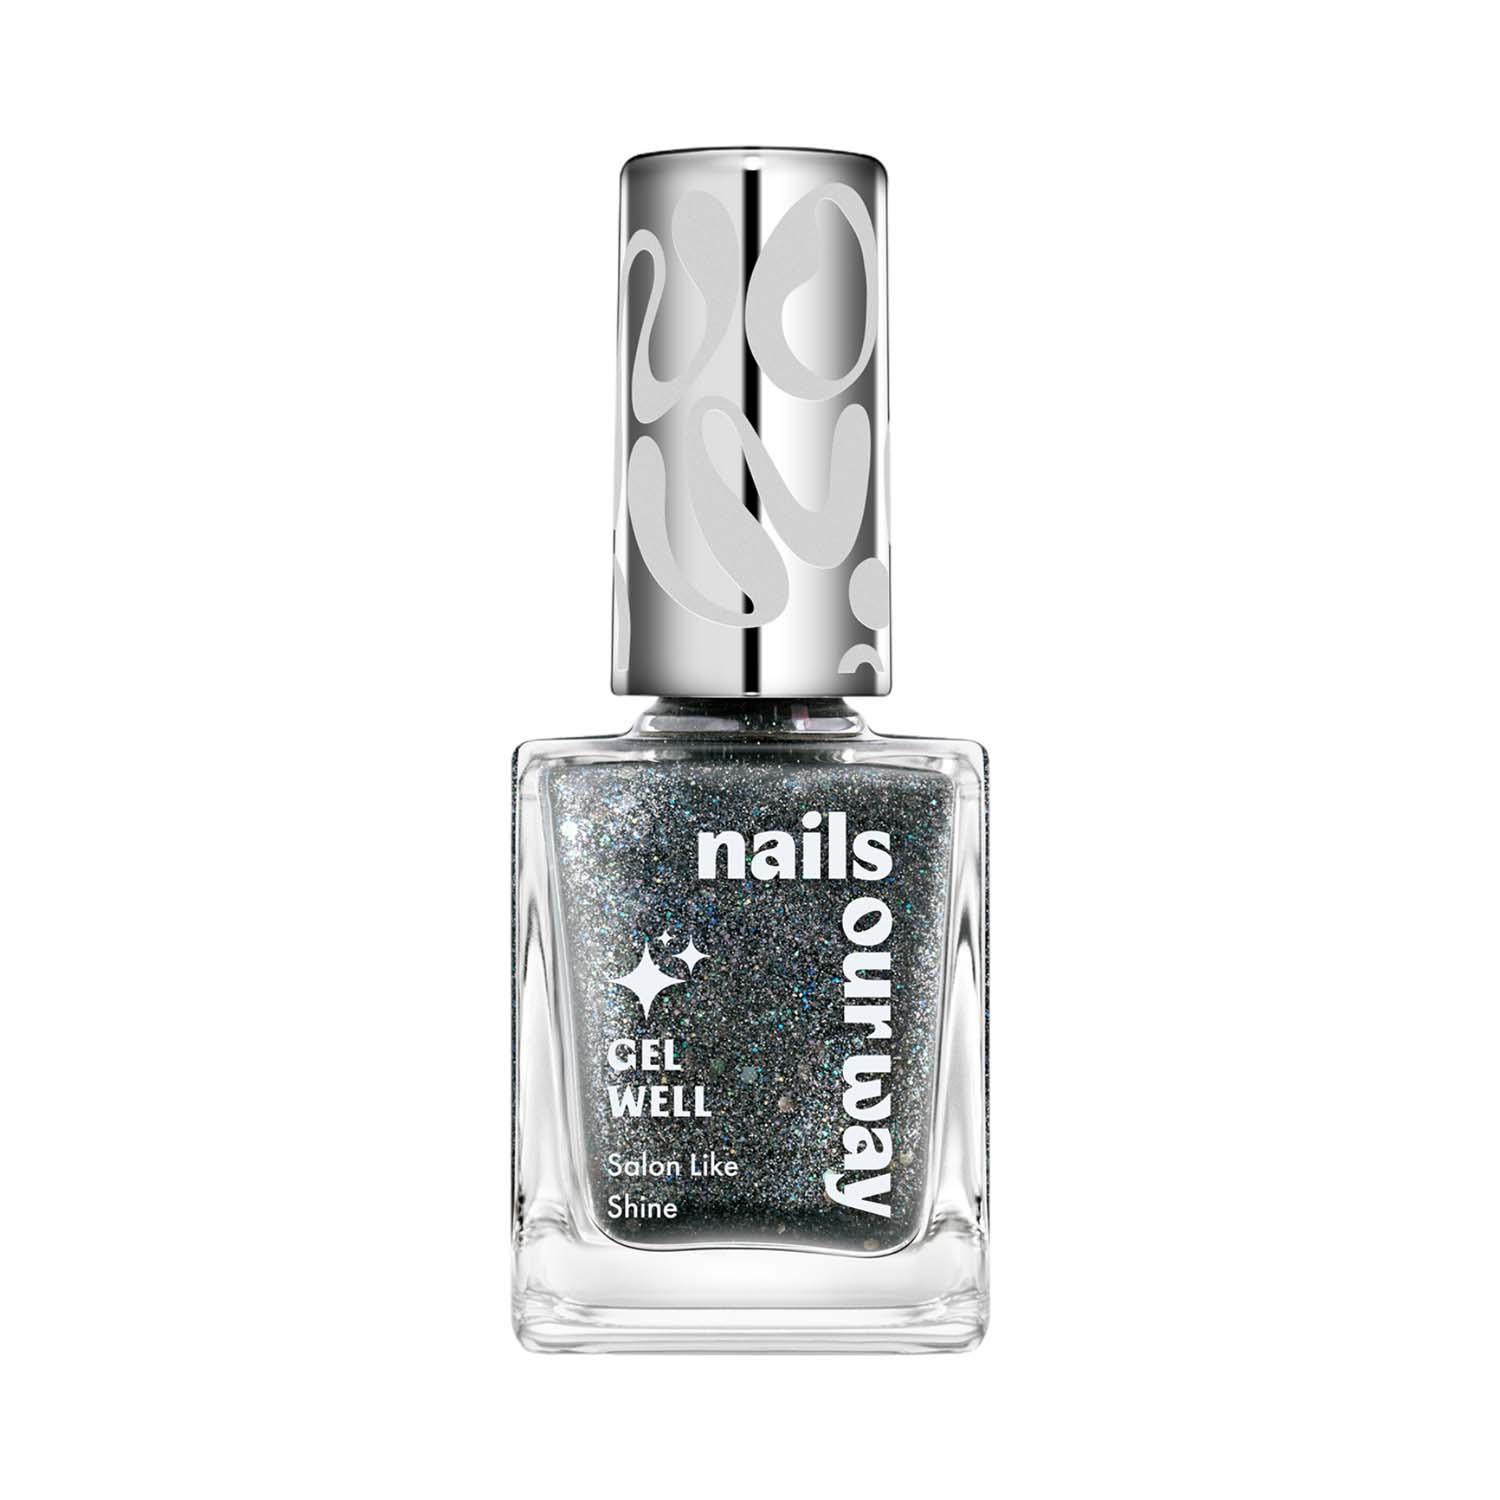 Nails Our Way | Nails Our Way Gel Well Nail Enamel - 707 Remarkable (10 ml)